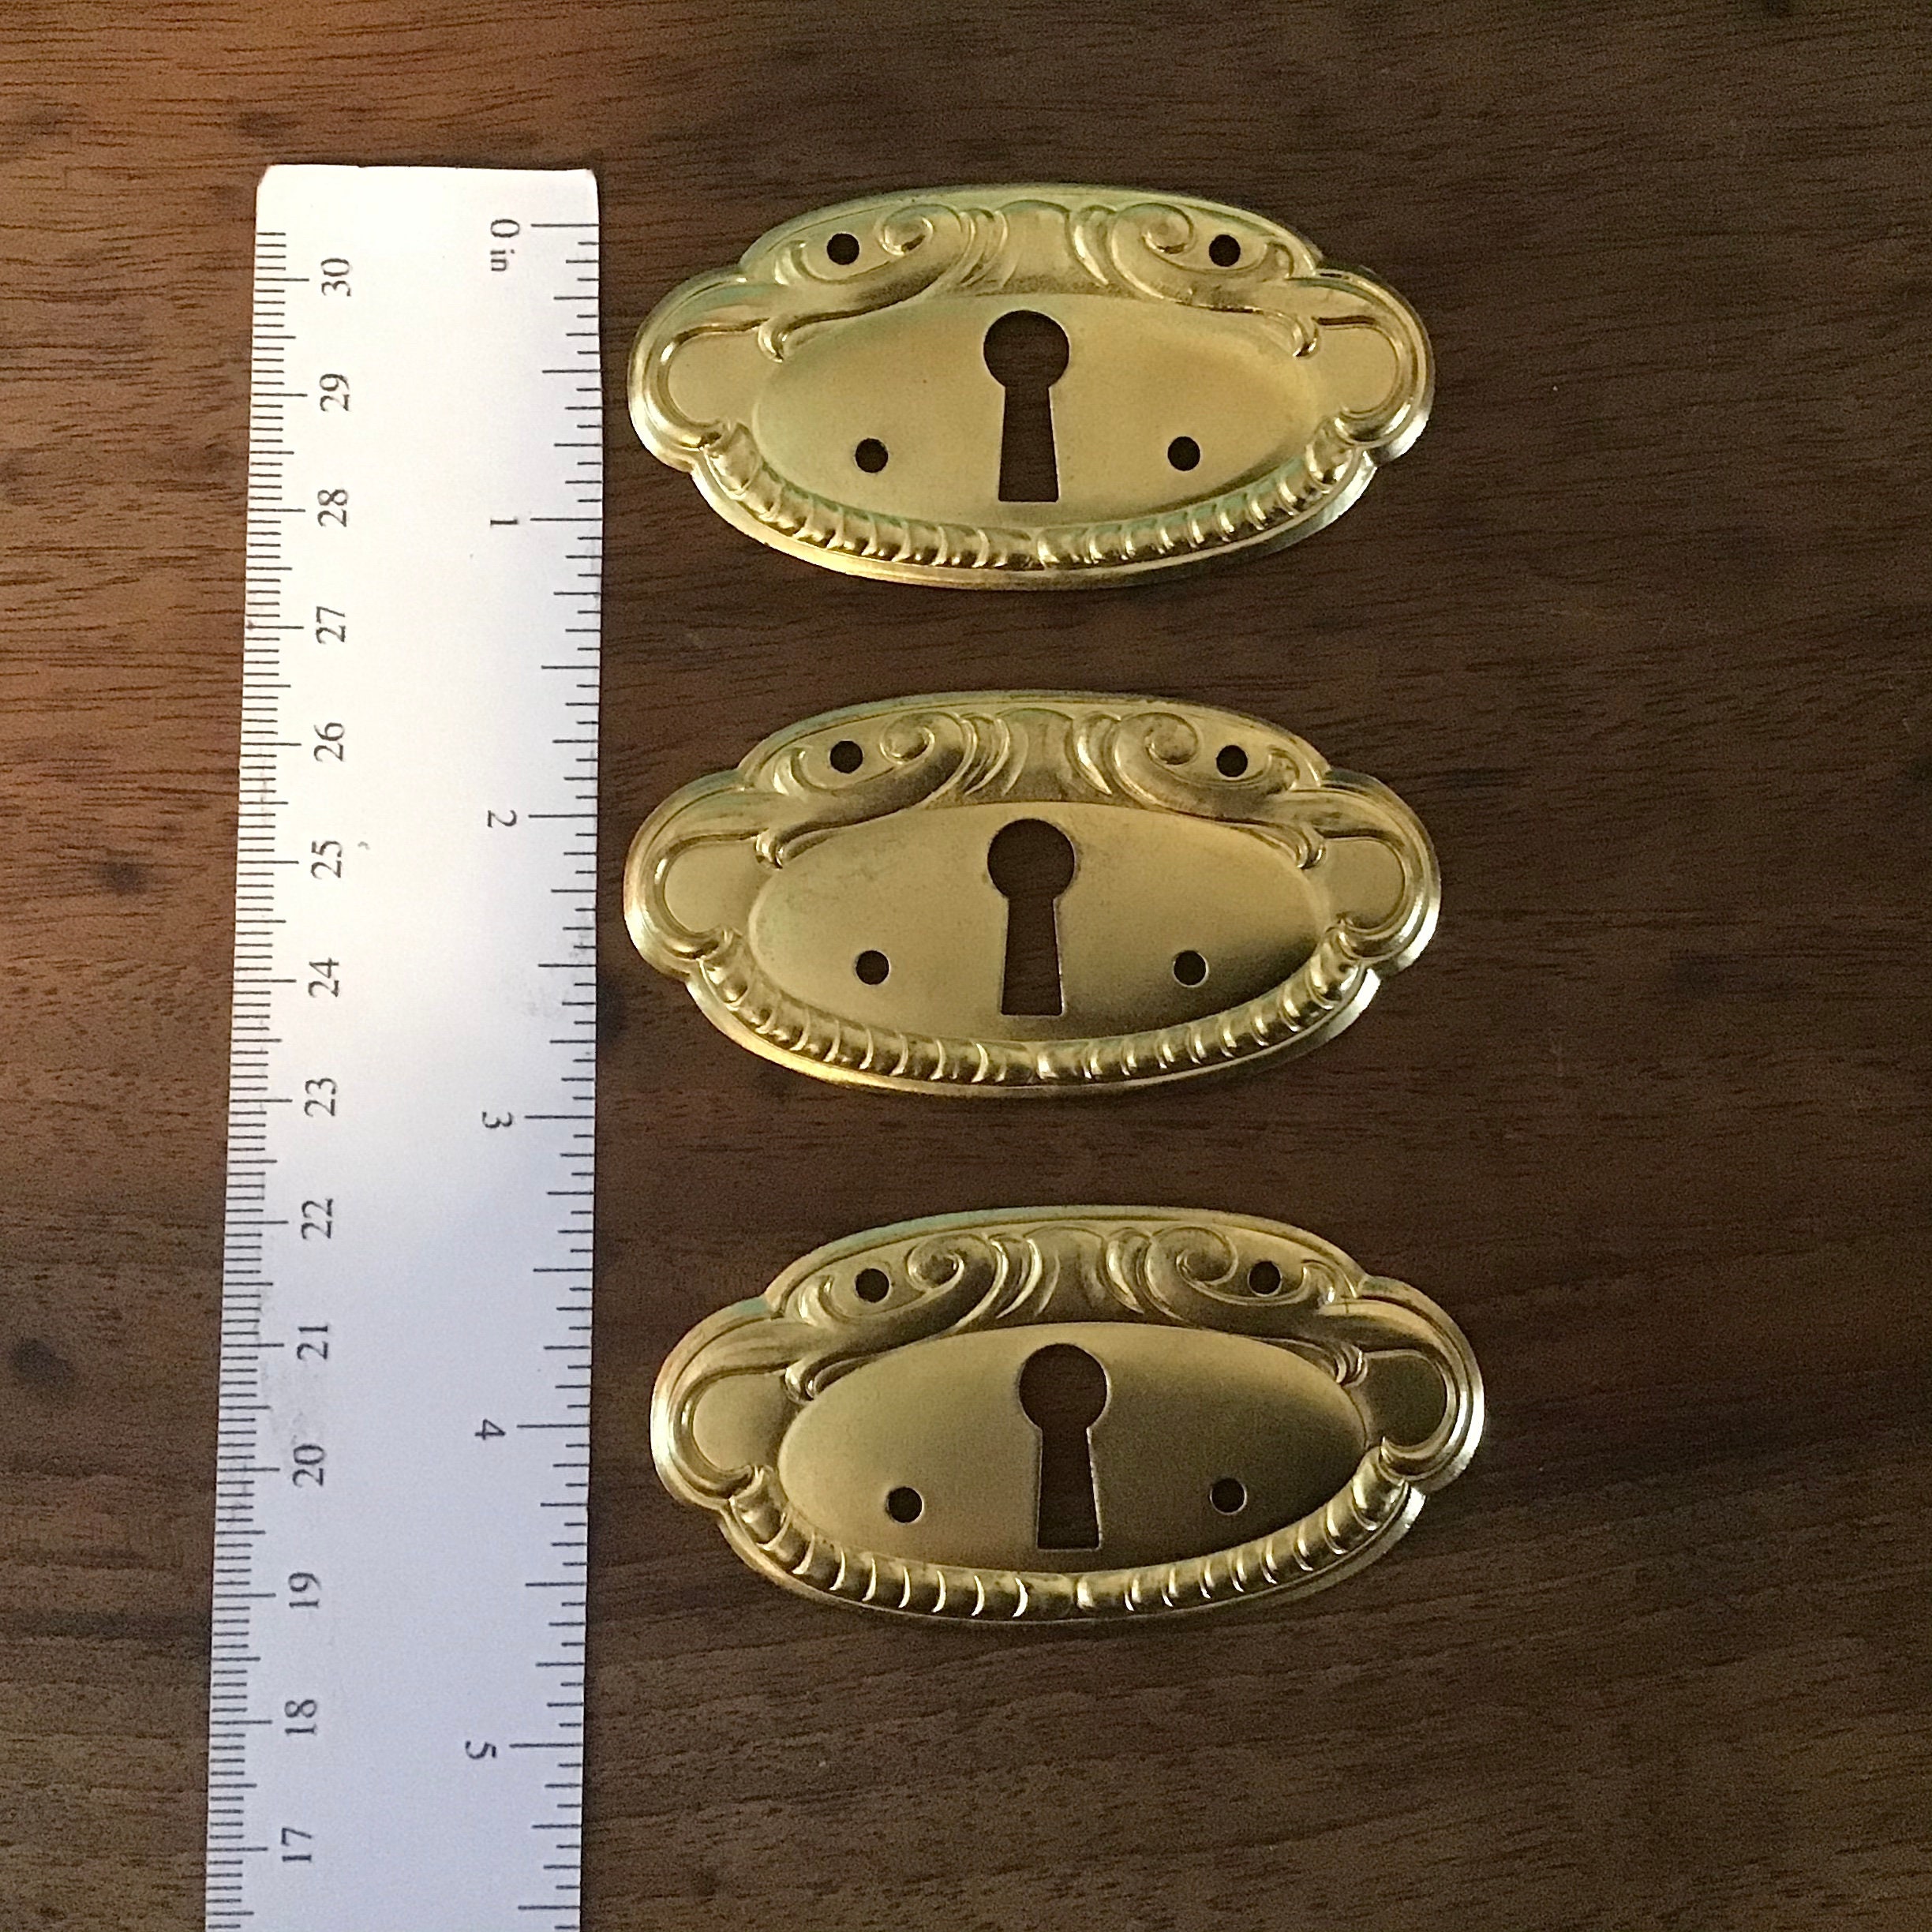 3 Vintage Brass Key Escutcheons for Drawer or Cabinet a group | Etsy